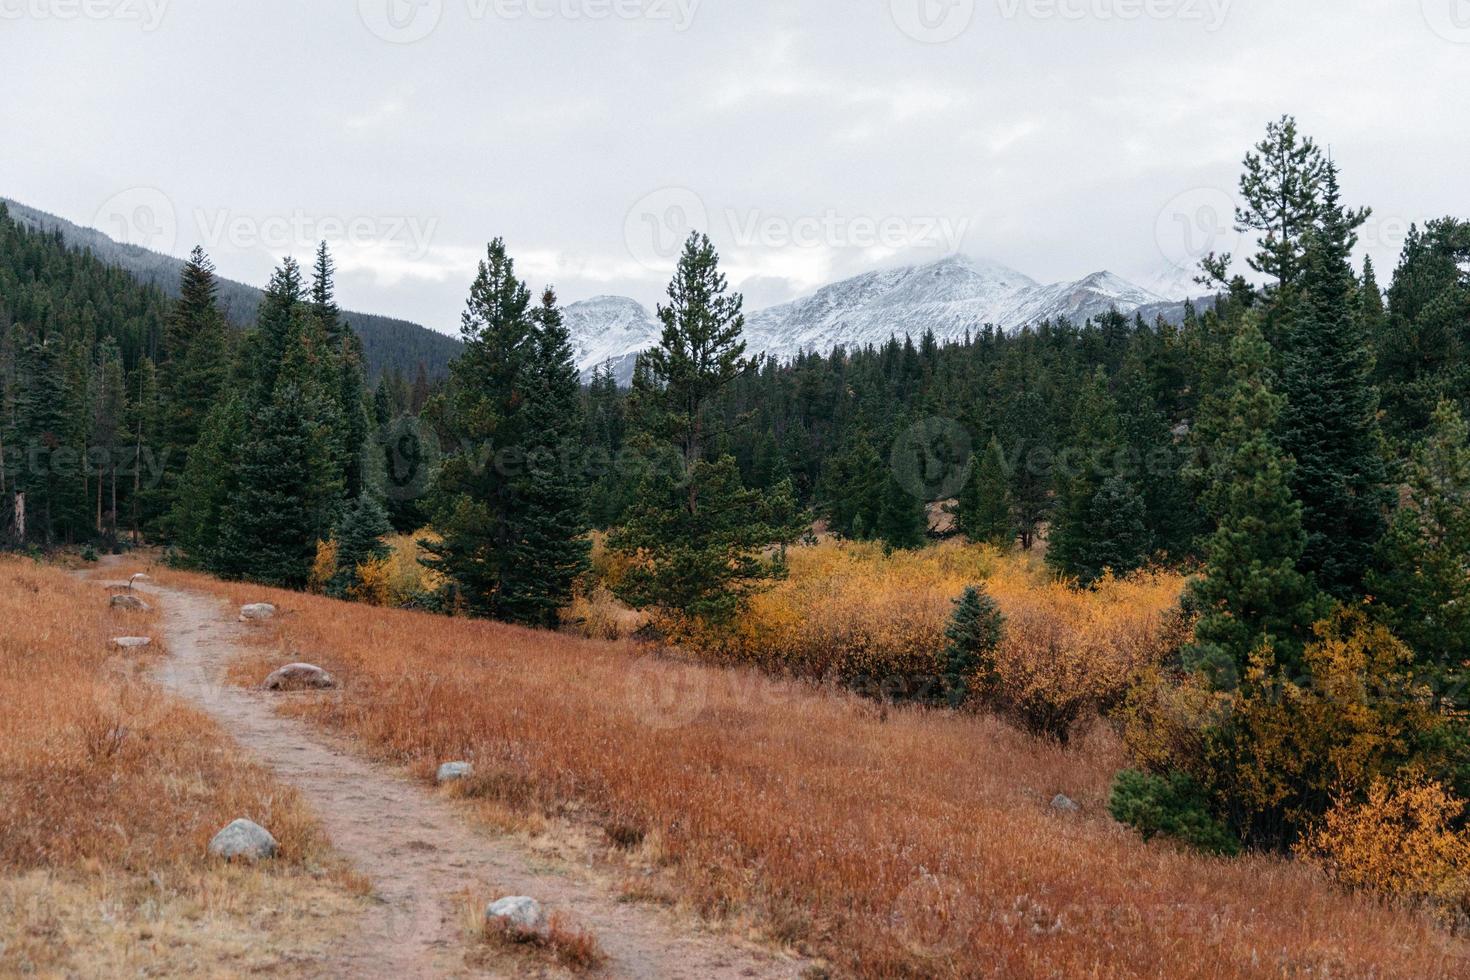 Forest with red rock formations photo